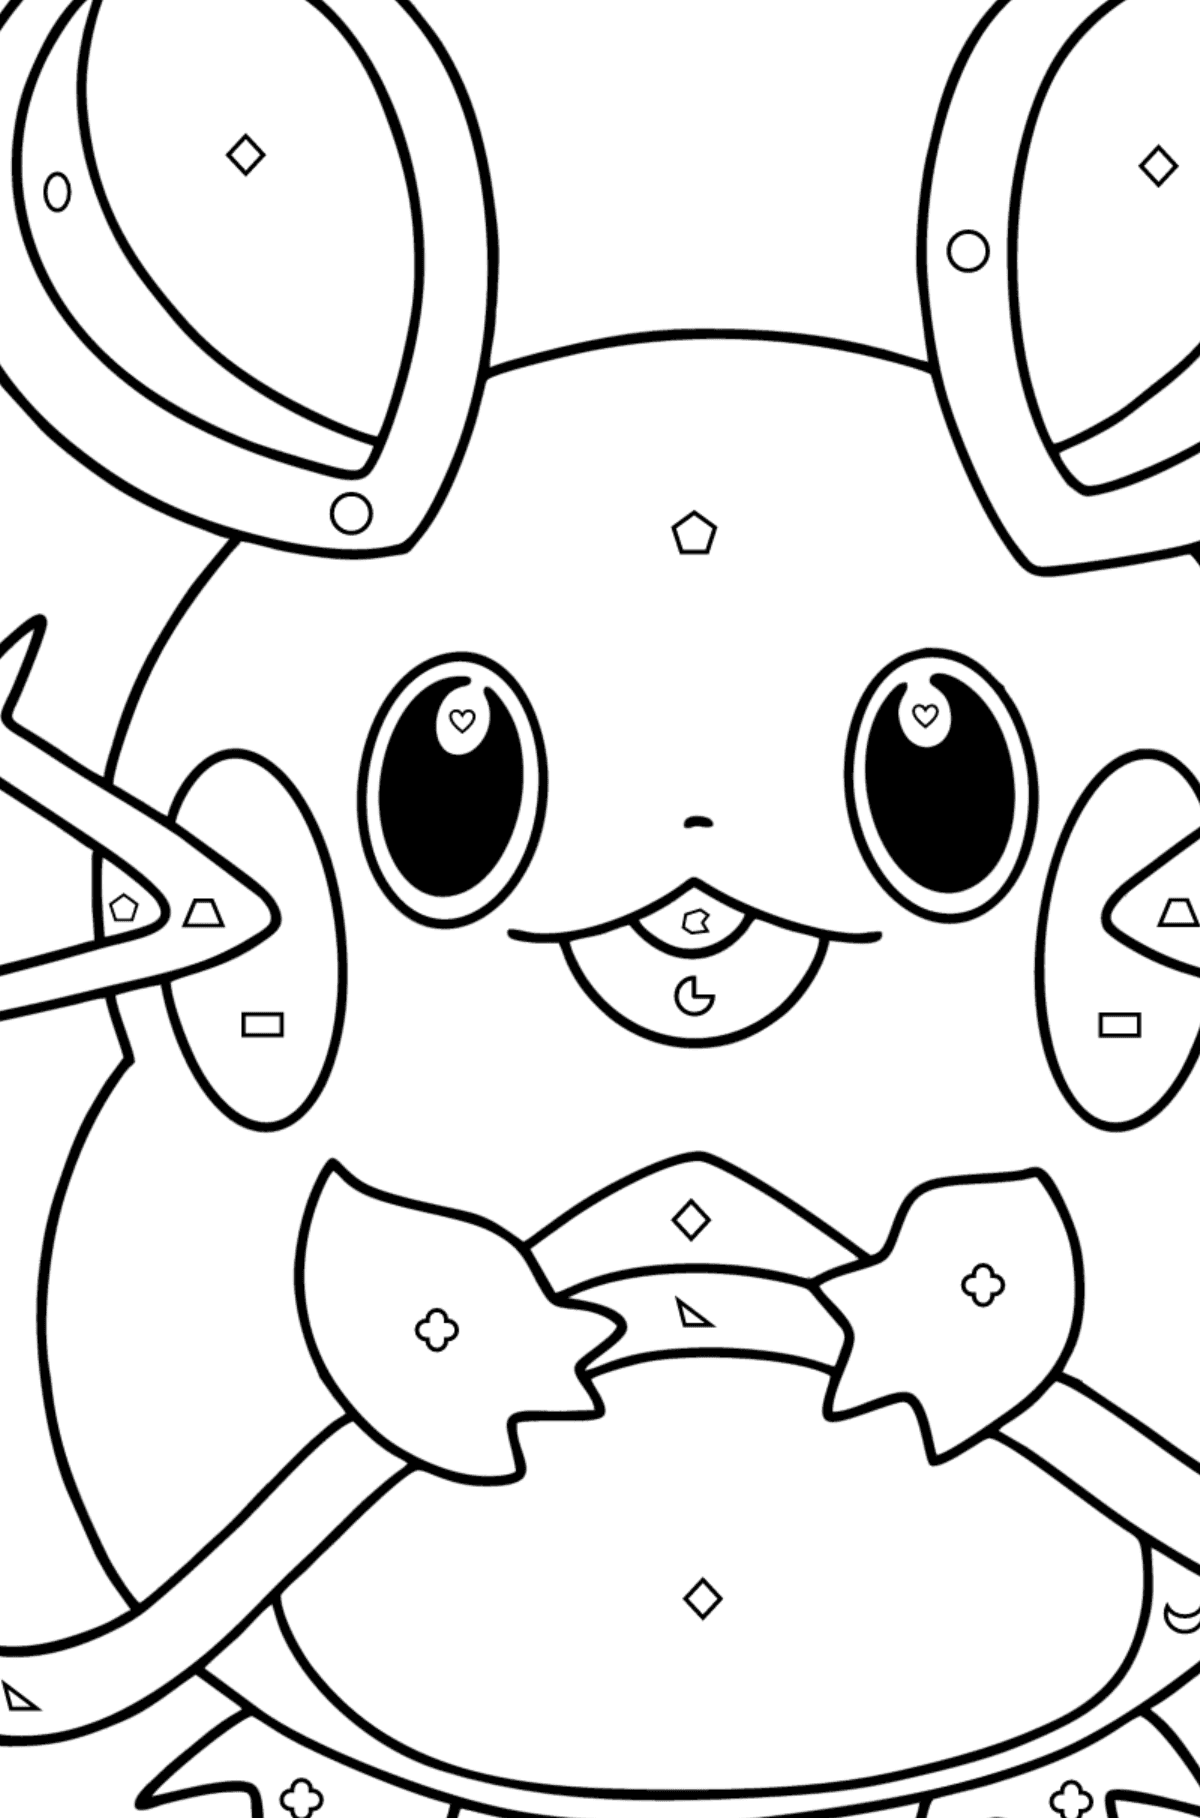 Colouring page Pokémon X and Y Dedenne - Coloring by Geometric Shapes for Kids